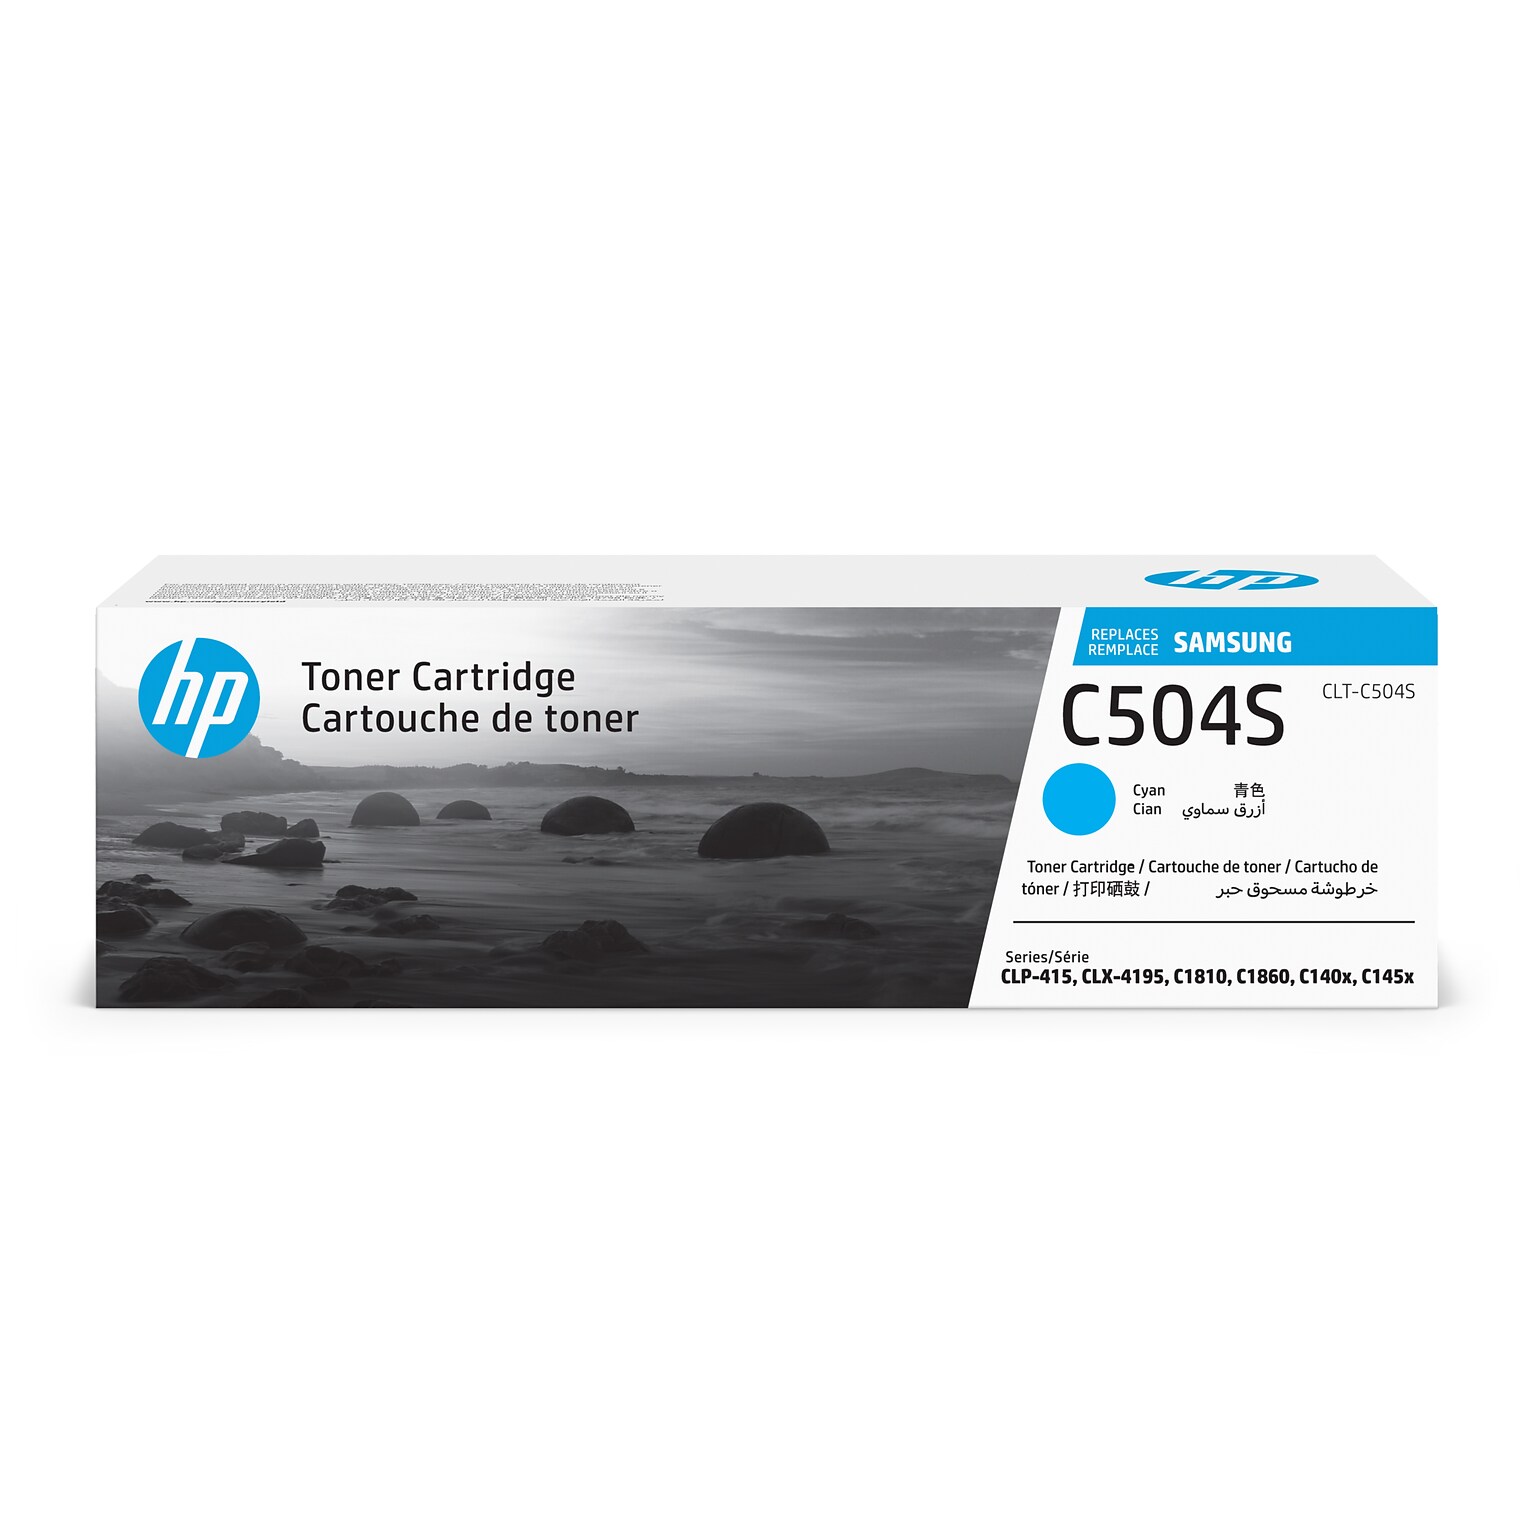 HP C504S Cyan Toner Cartridge for Samsung CLT-C504S (SU025), Samsung-branded printer supplies are now HP-branded